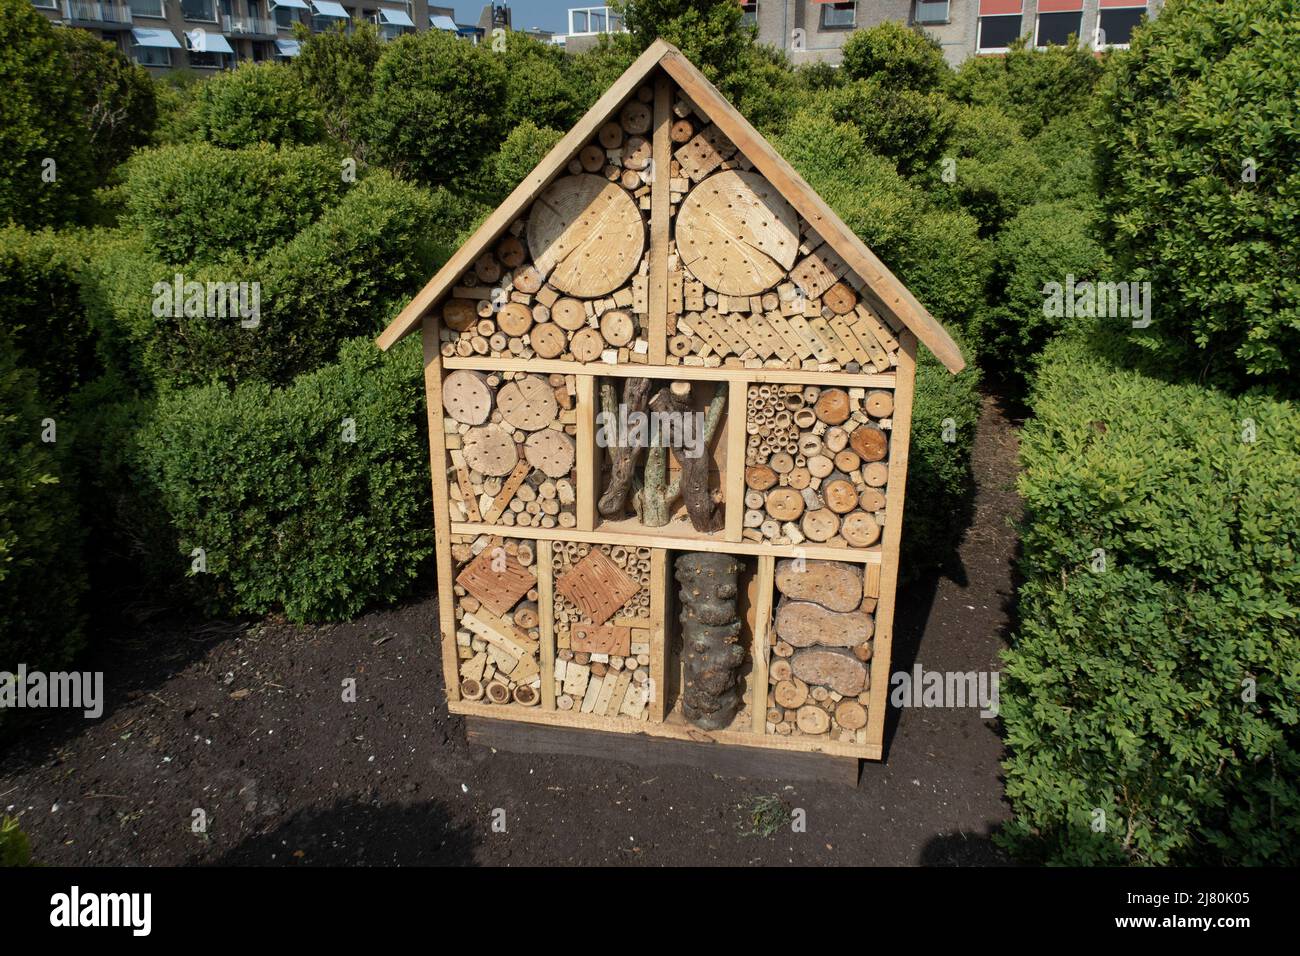 Insect hotel aka bug hotel aka insect house in a garden Stock Photo